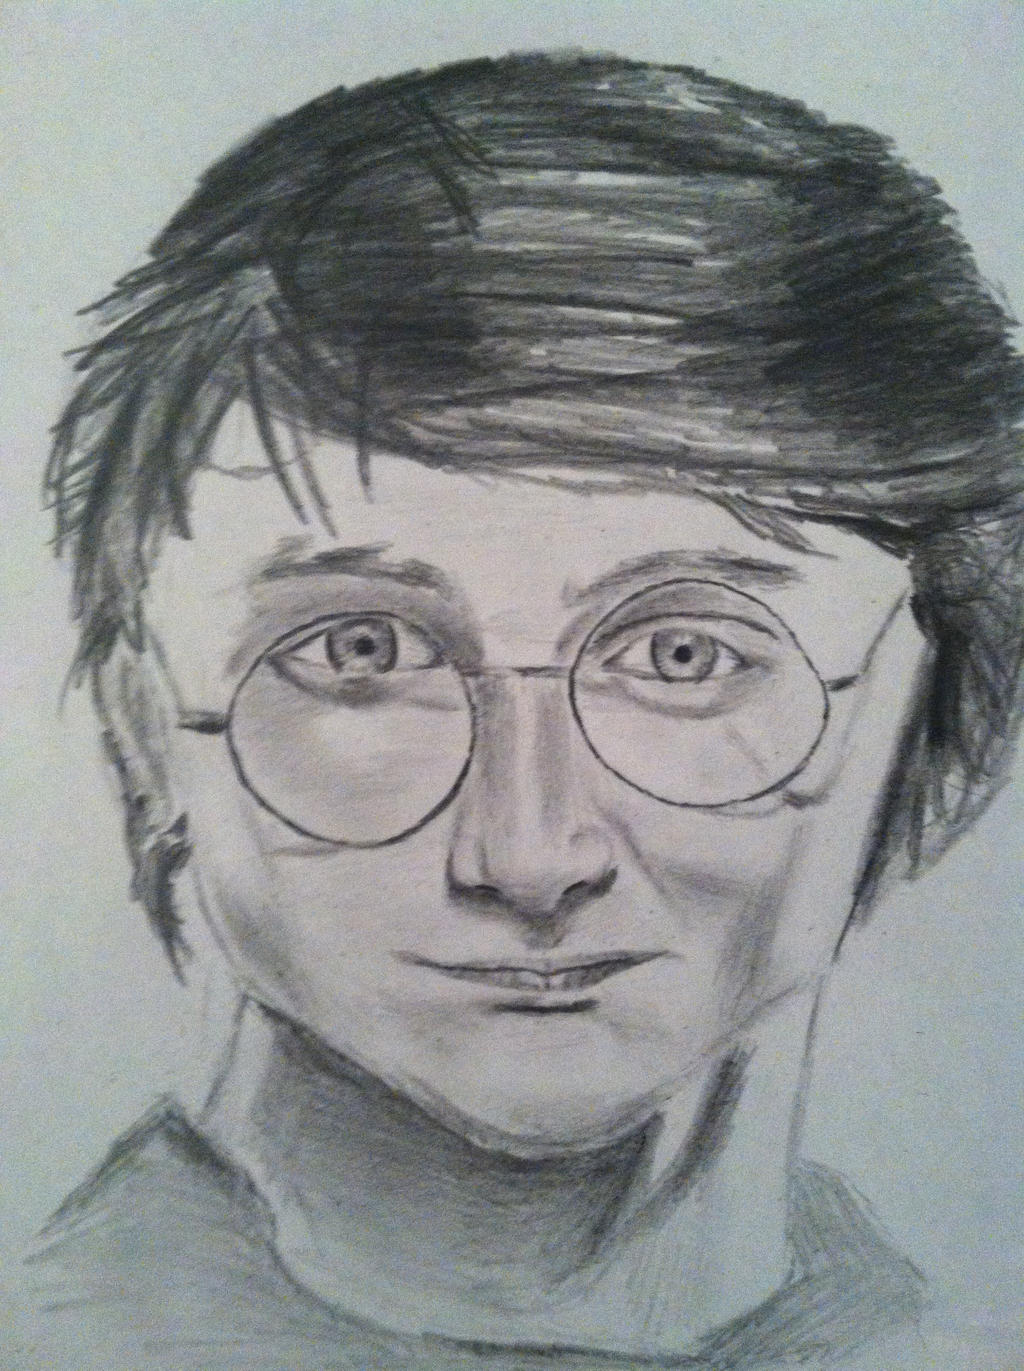 Pencil drawing of Harry potter by Floridastate on DeviantArt